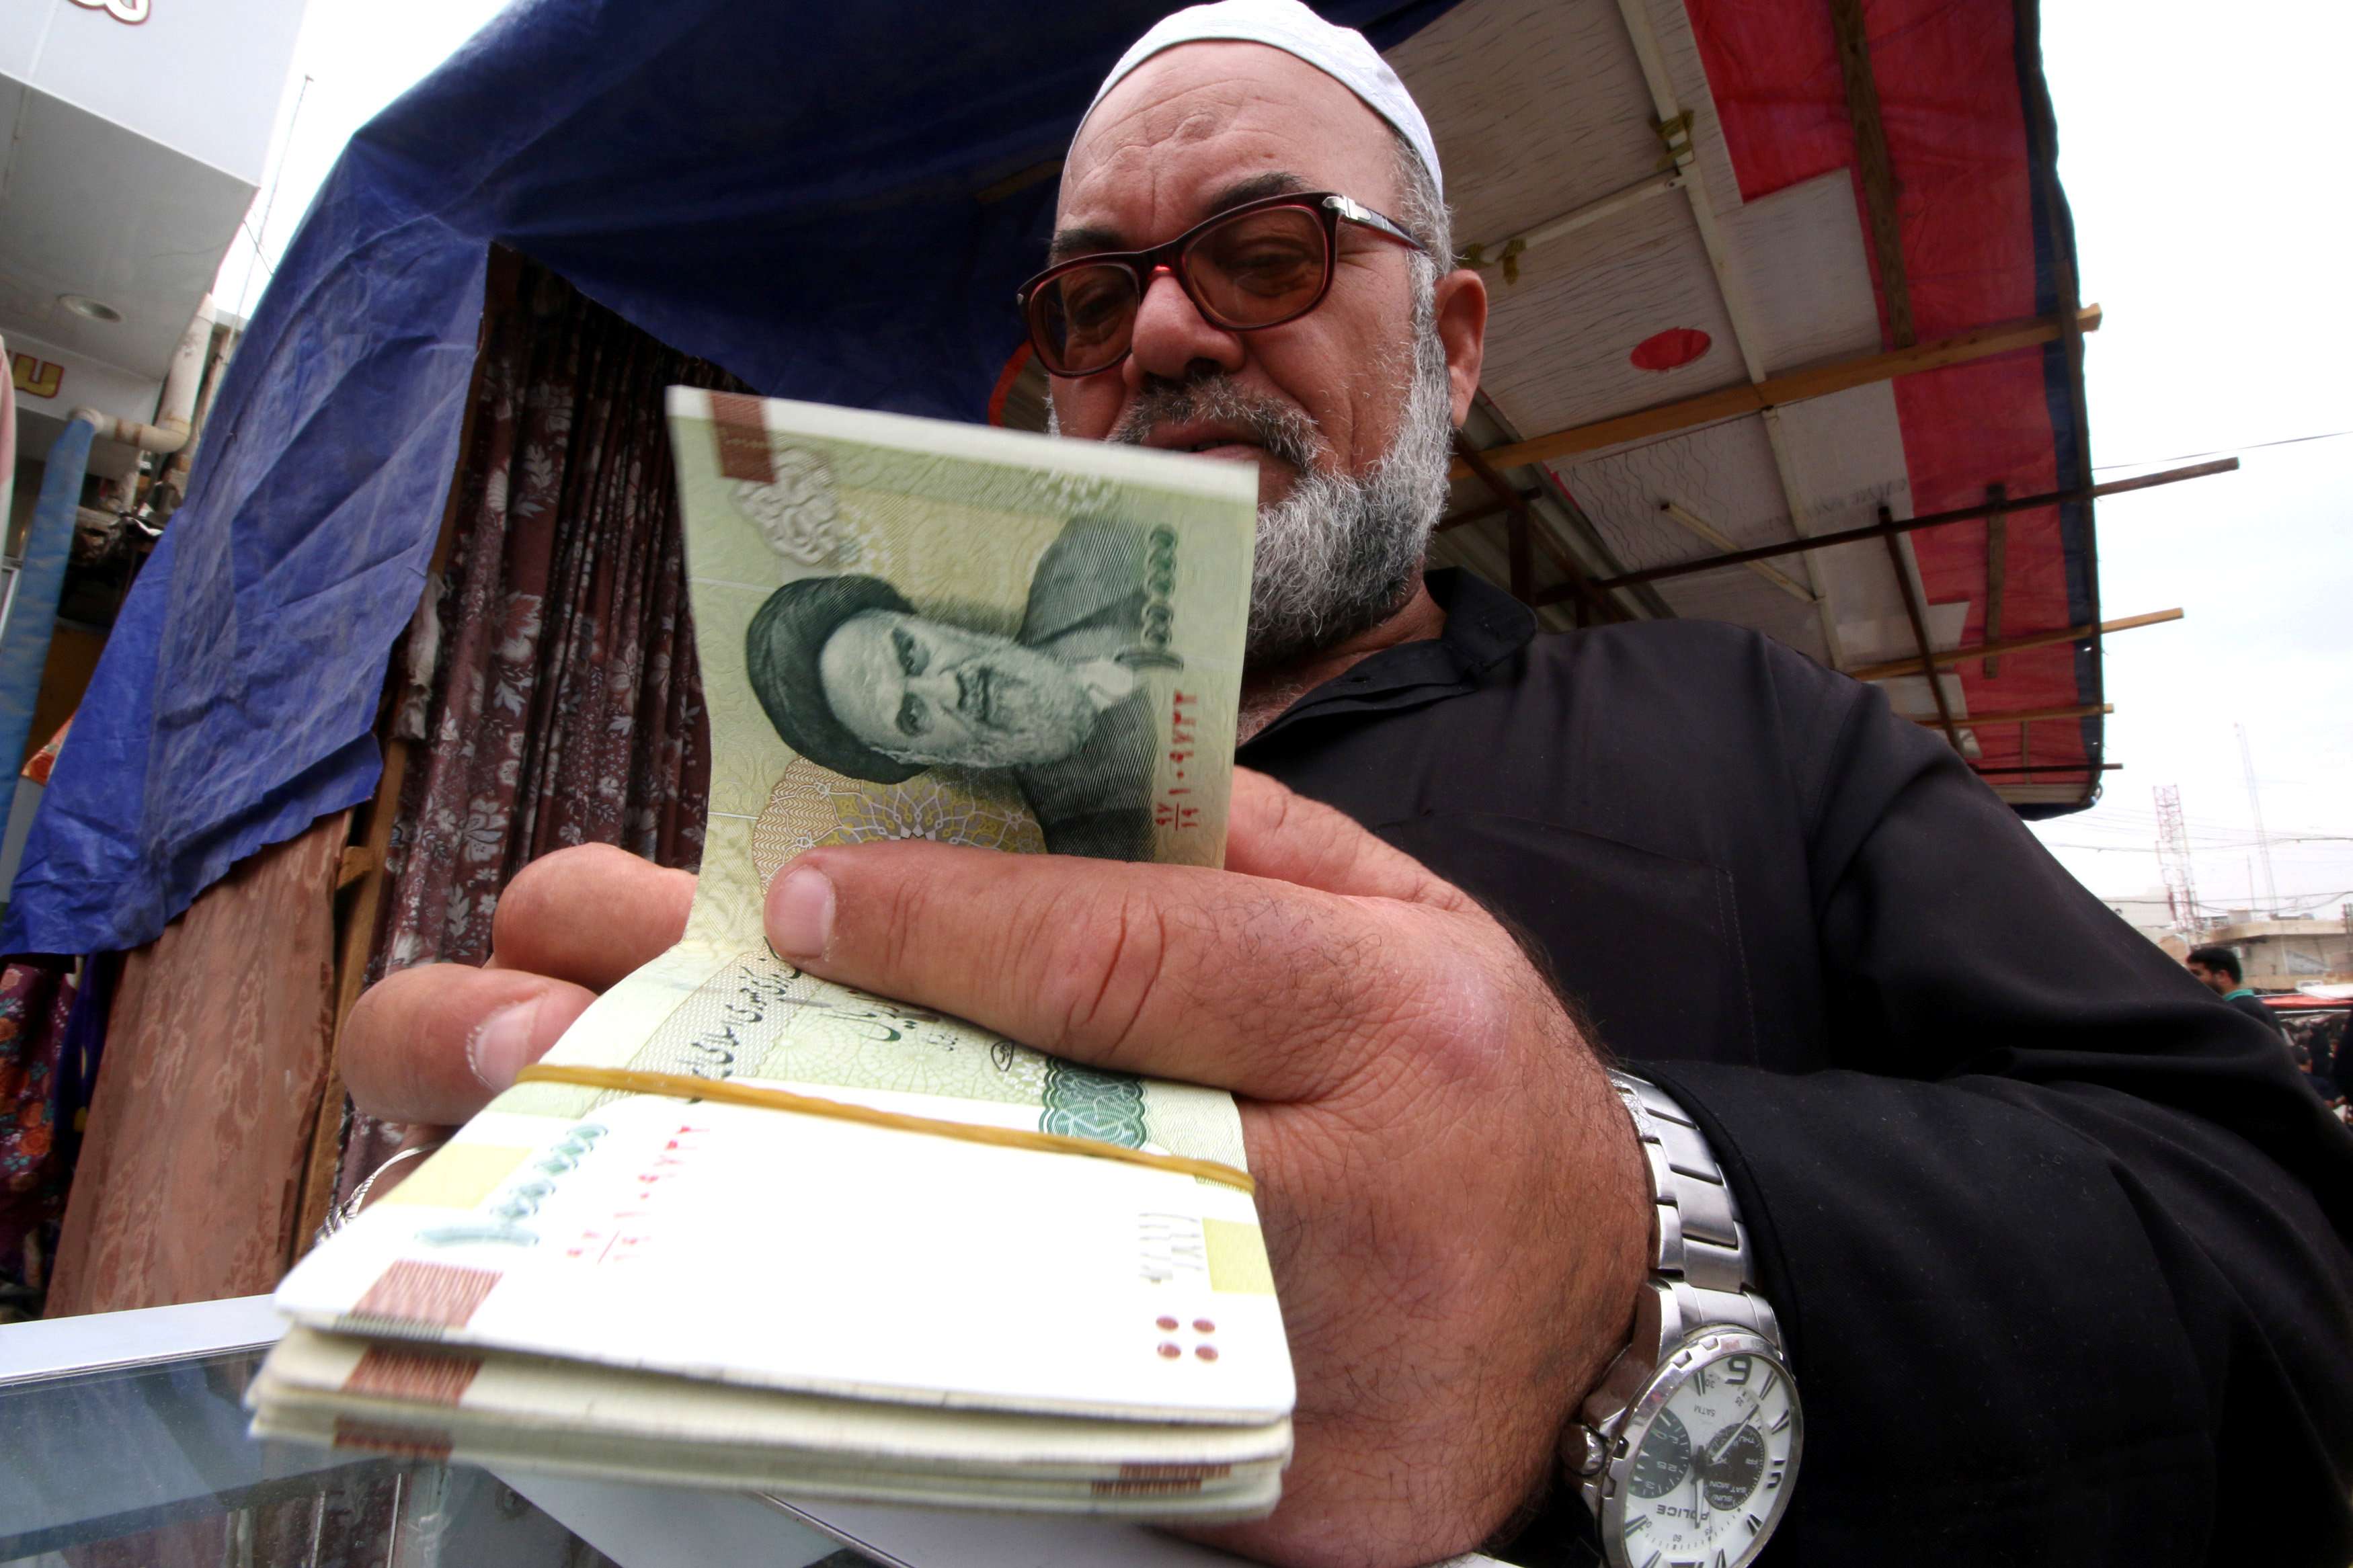 Iranians were not holding their breath for a quick solution to the country's economic woes.